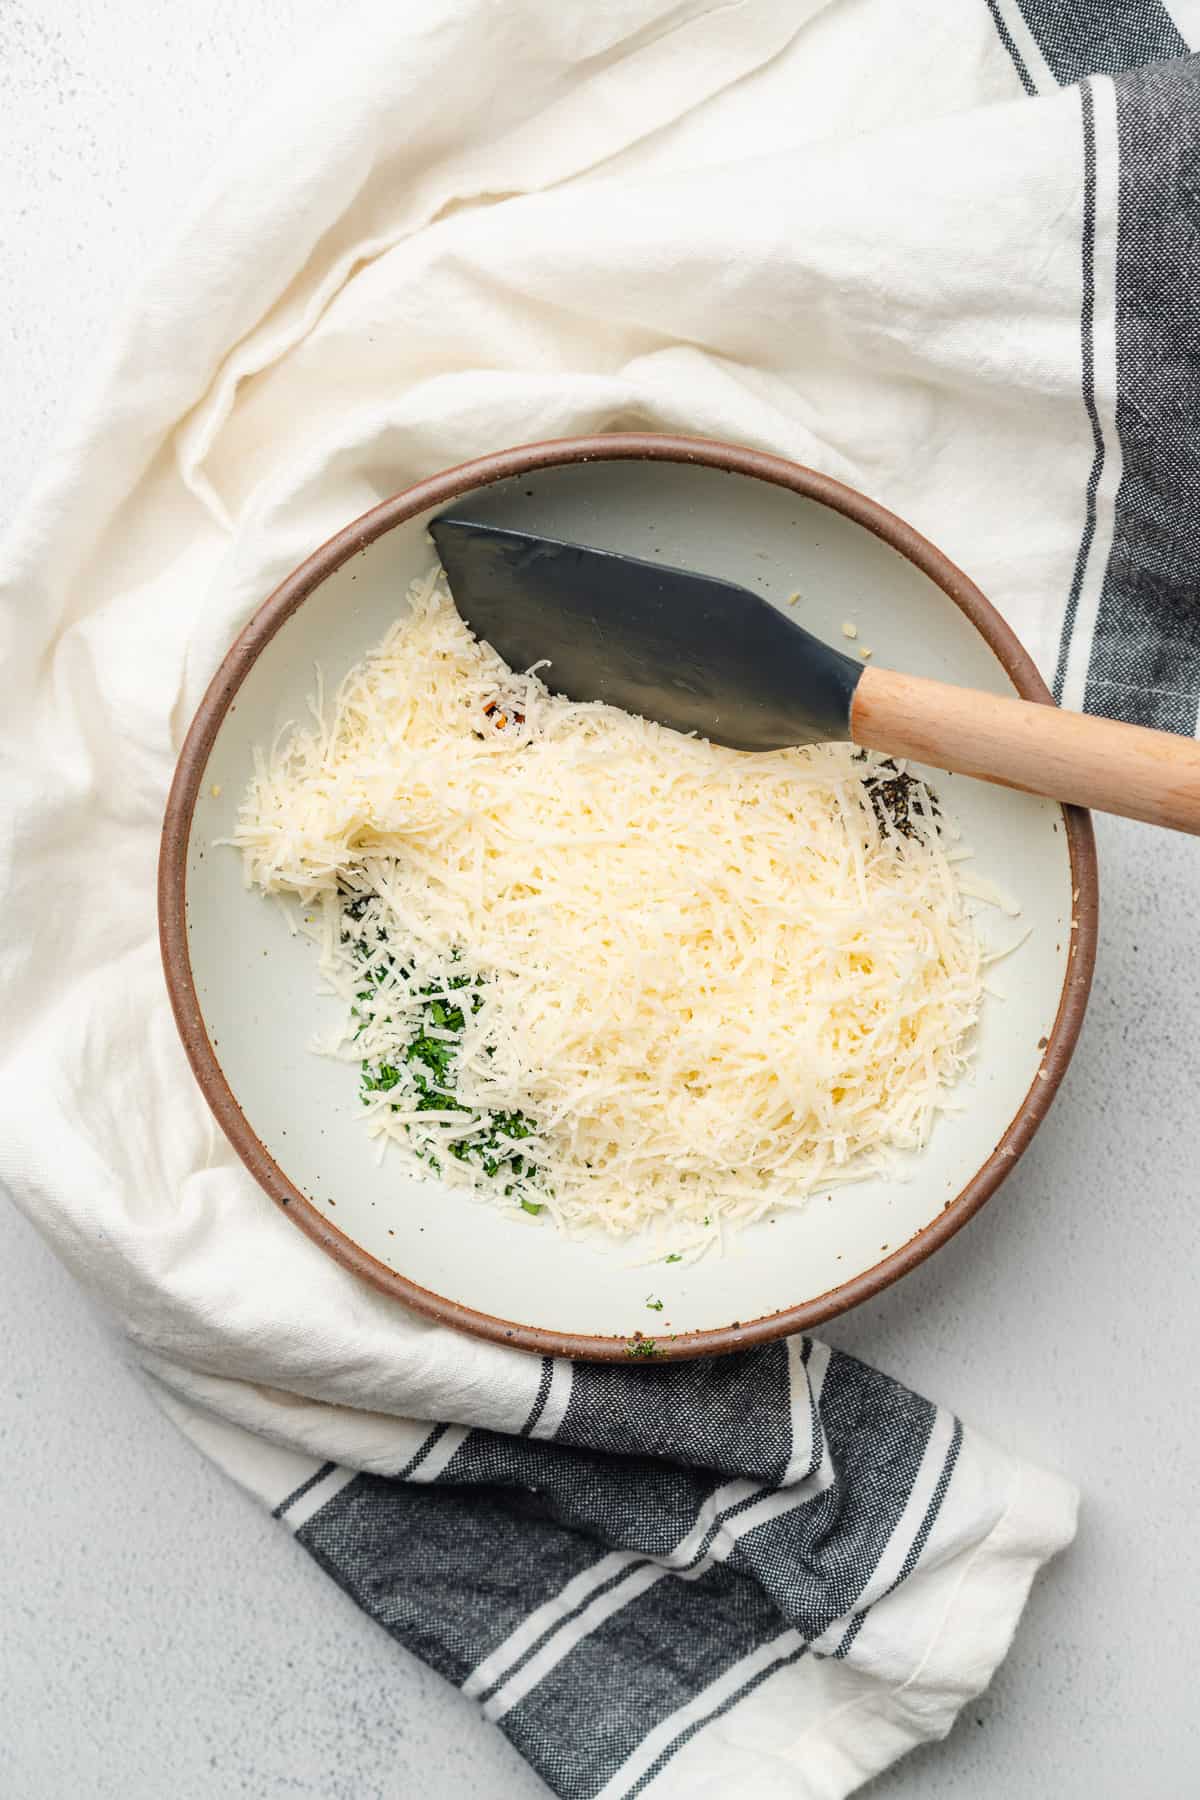 seasonings, herbs, garlic, butter and parmesan cheese in a bowl with a small rubber spatula 